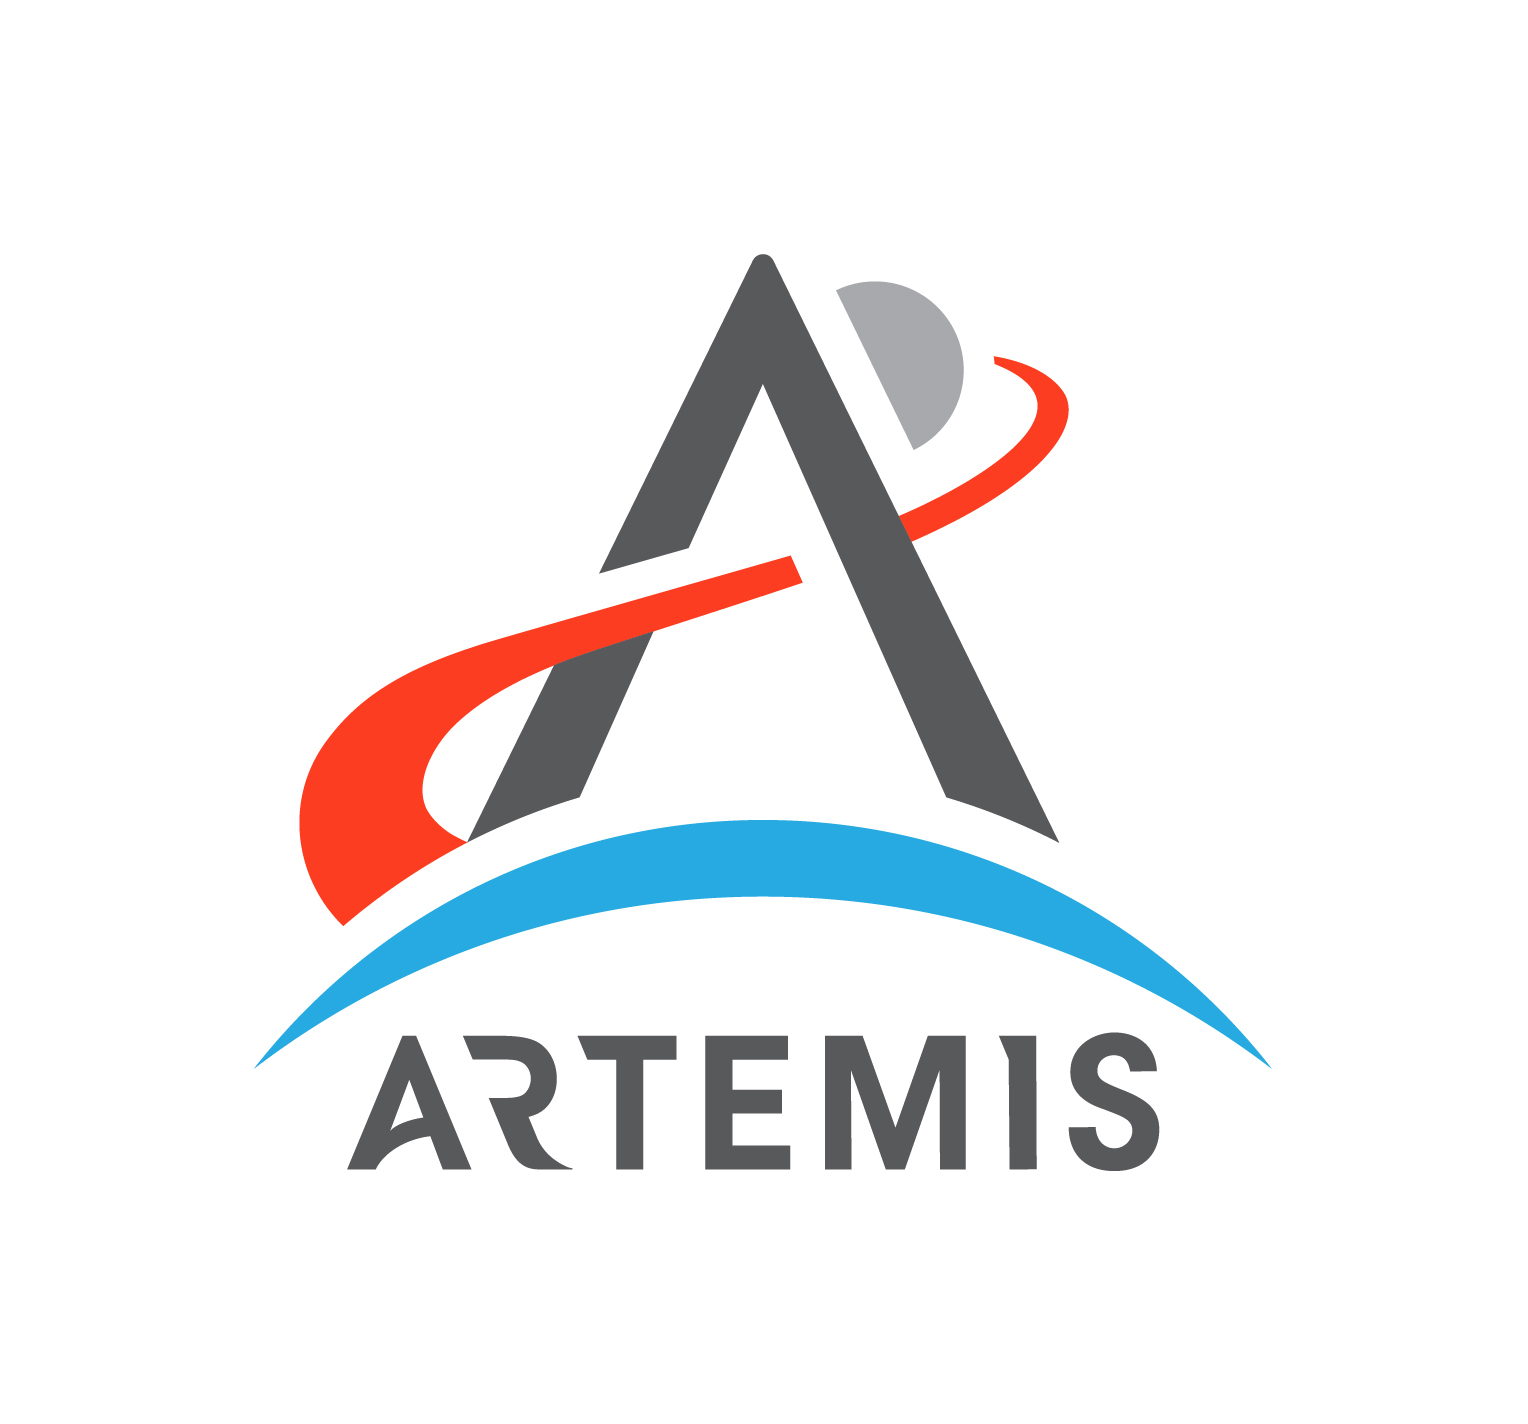 Artemis Logo - red rocket trail, blue arch that represents earth, ARTEMIS text, gray half sphere on a white background